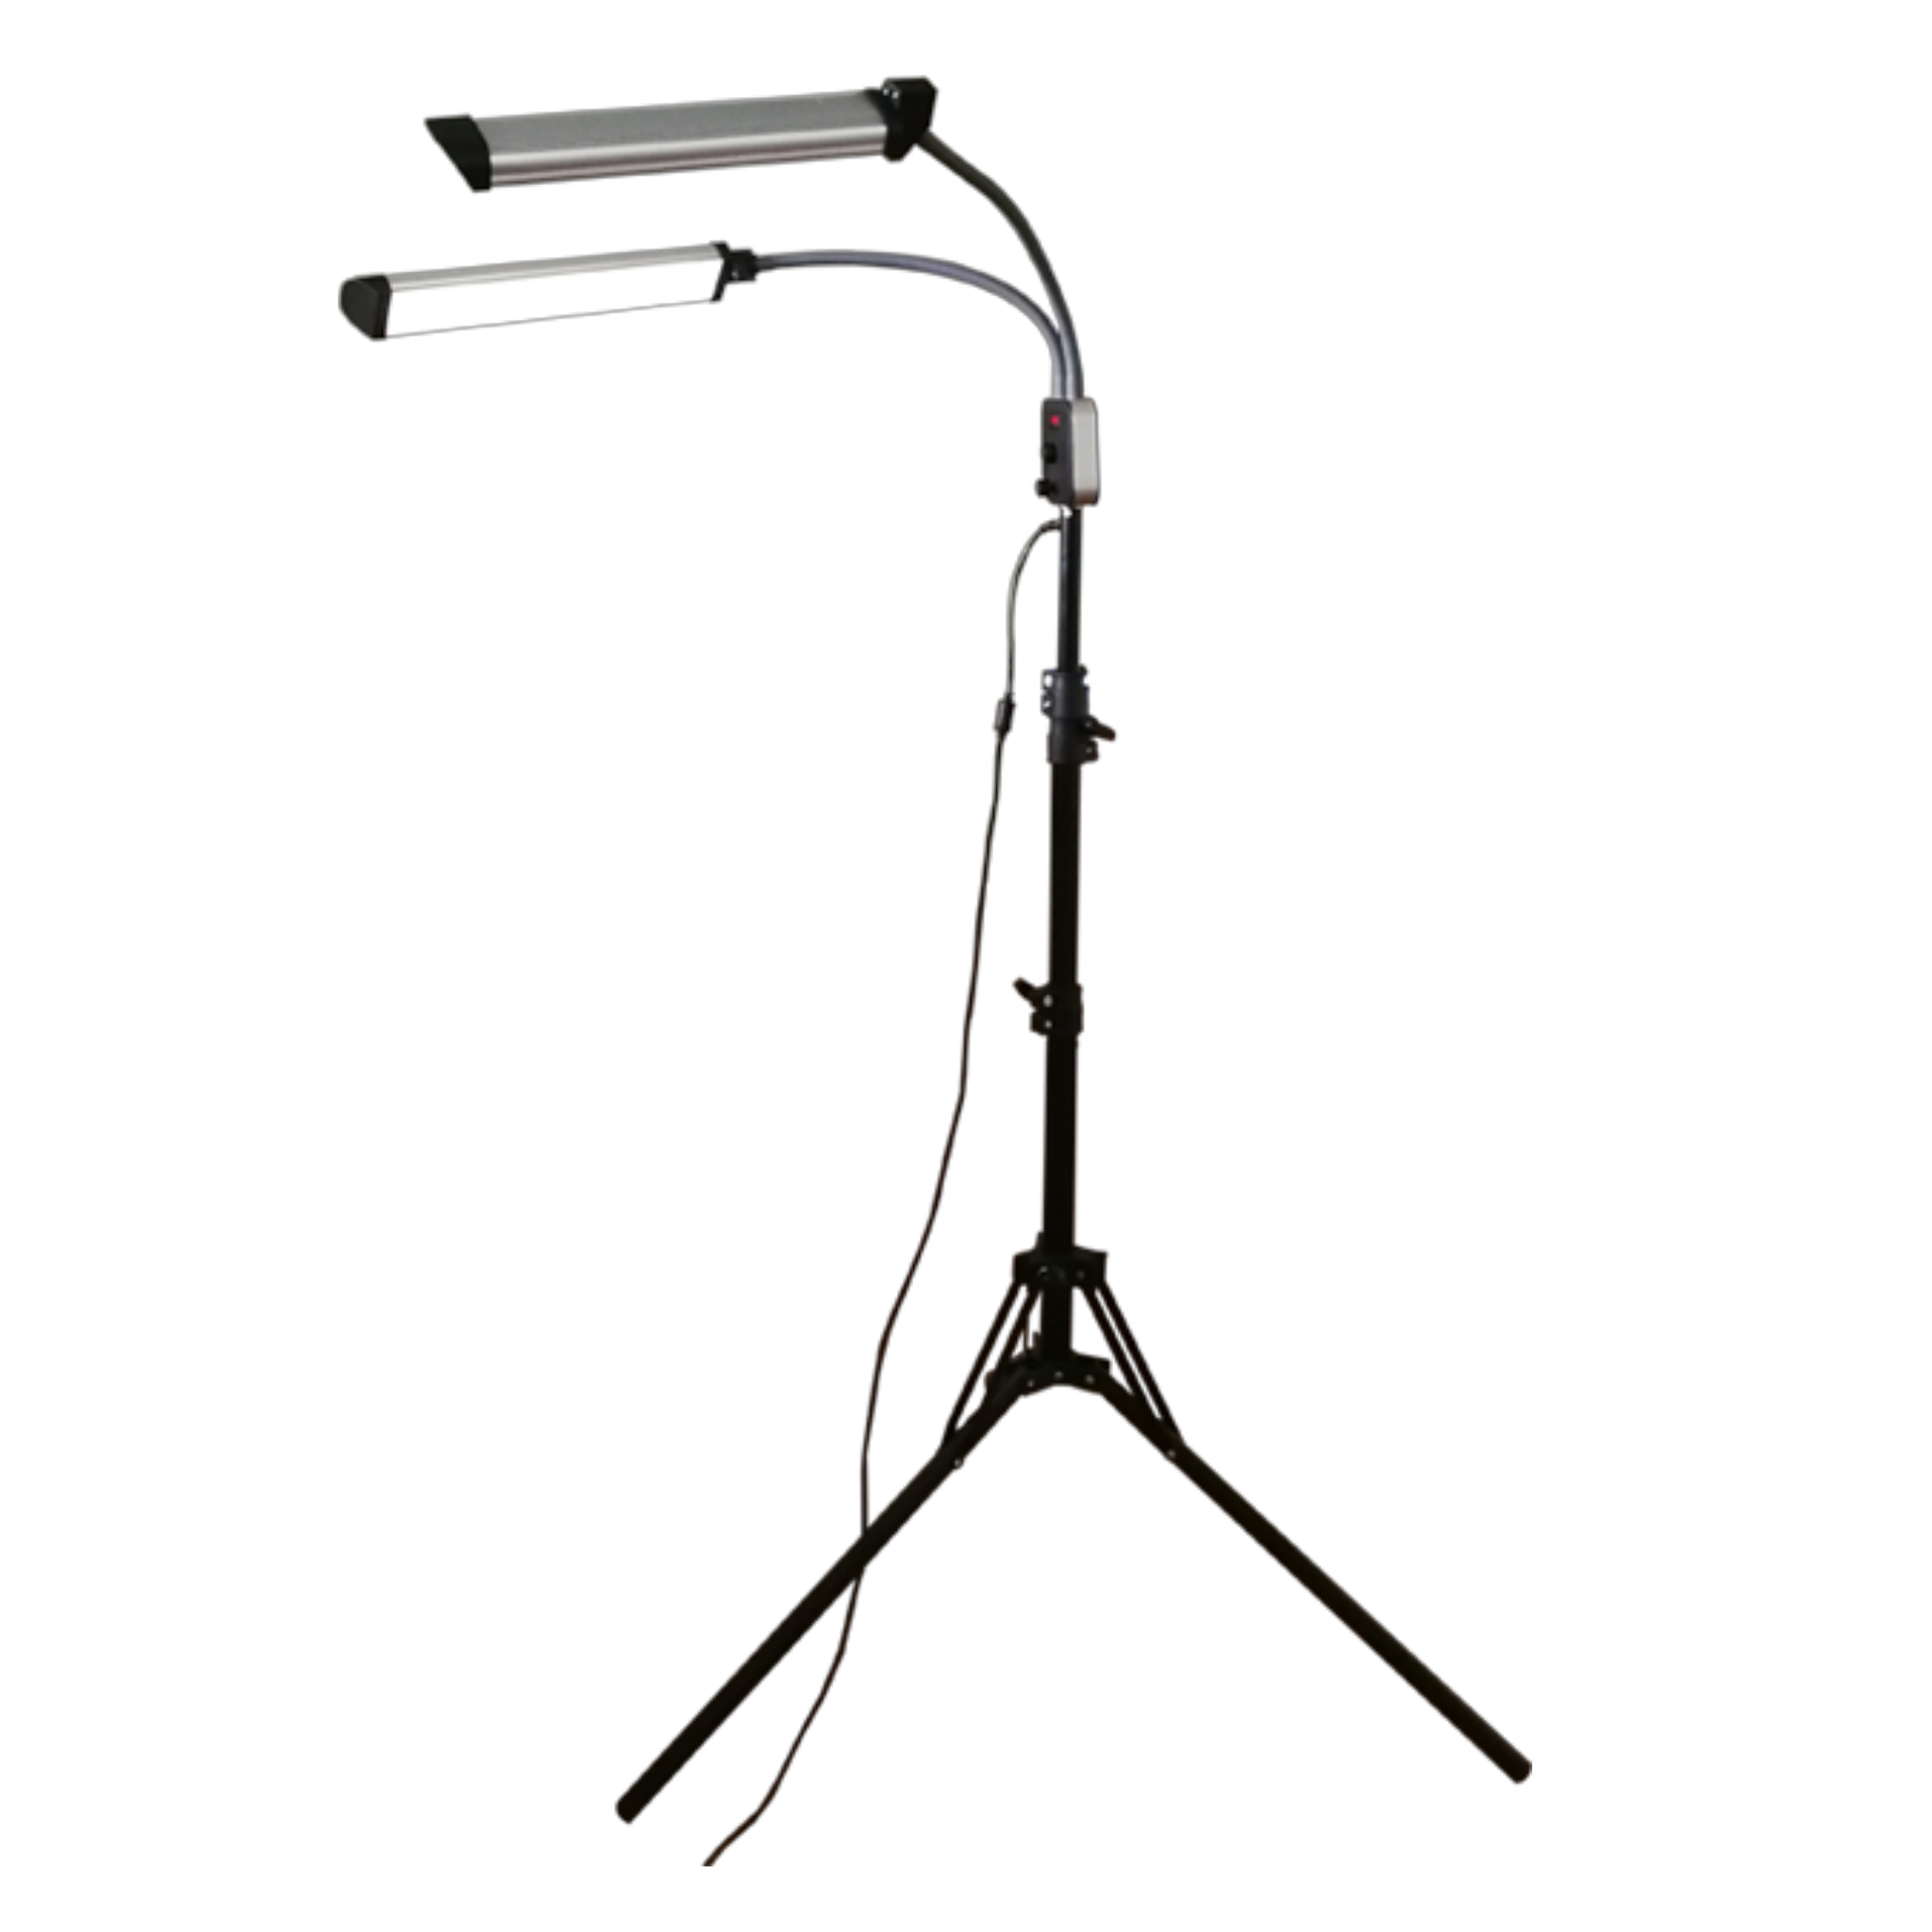 Soku Tattoo Double Arms Led Floor Lamp Soku Tattoo Supply pertaining to dimensions 2048 X 2048